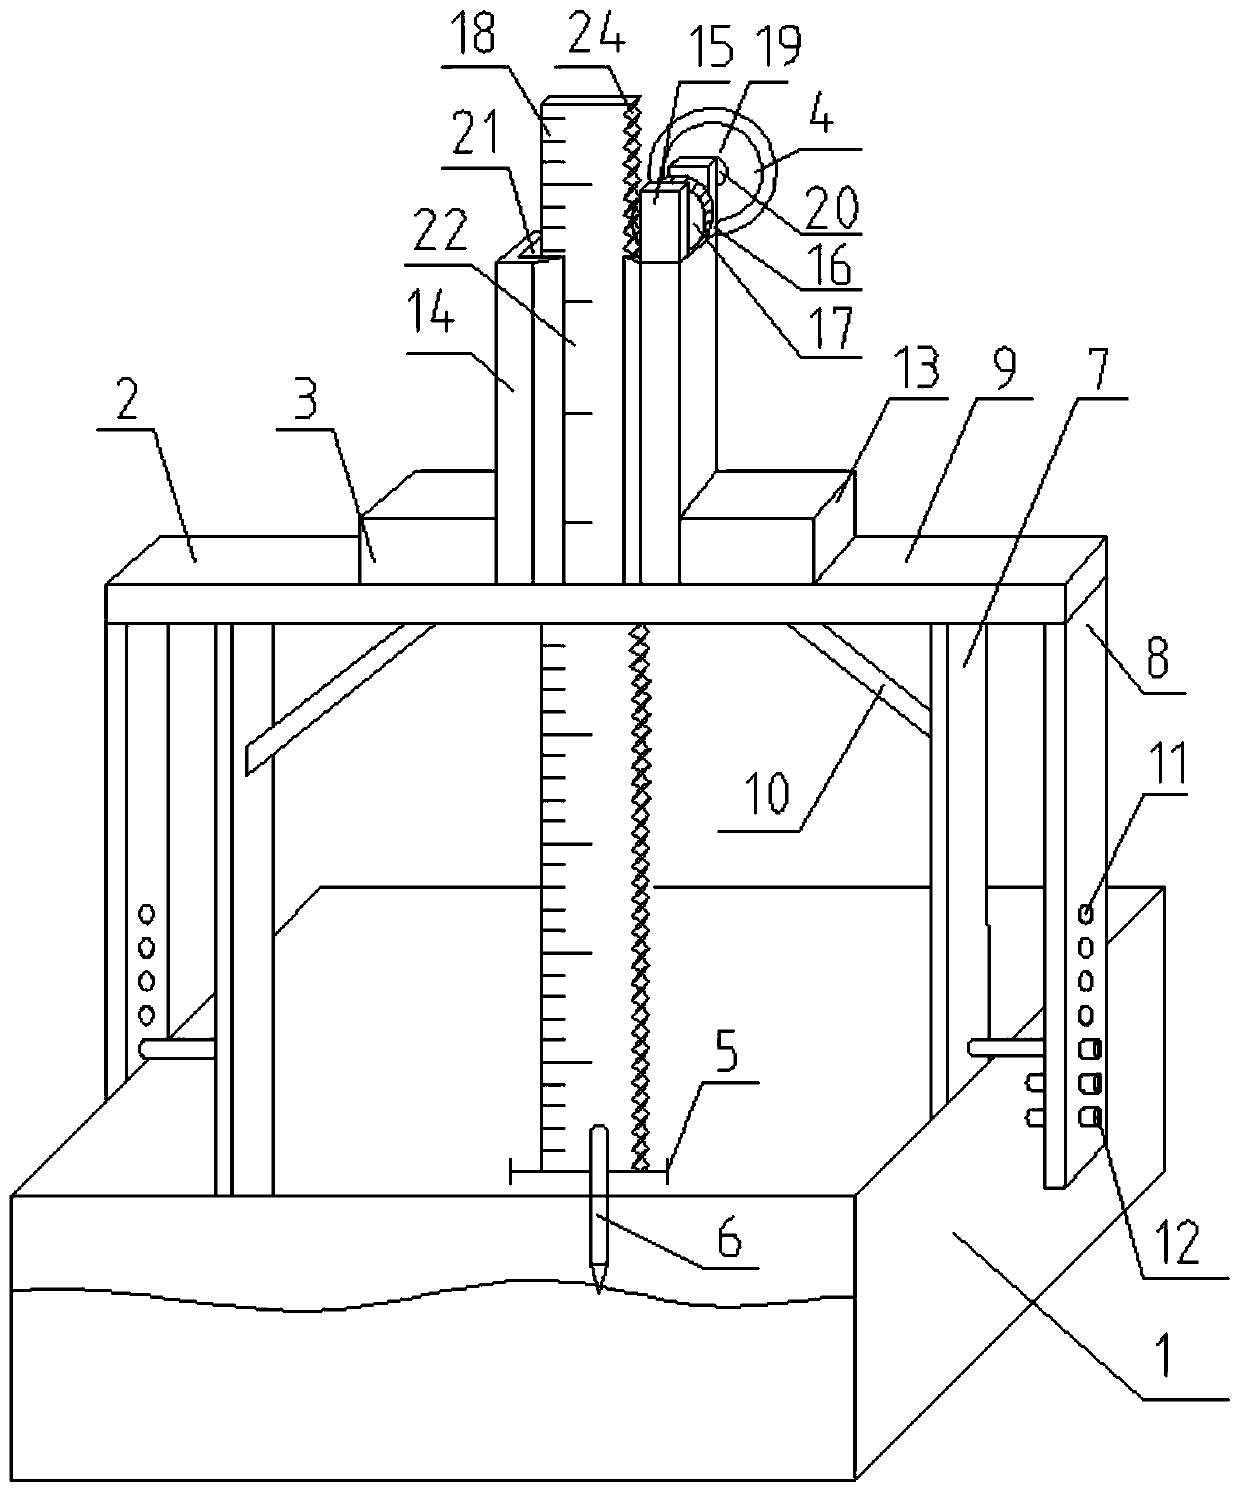 A device for measuring the fine profile of salt content in the bottom boundary layer of a water body in a tank